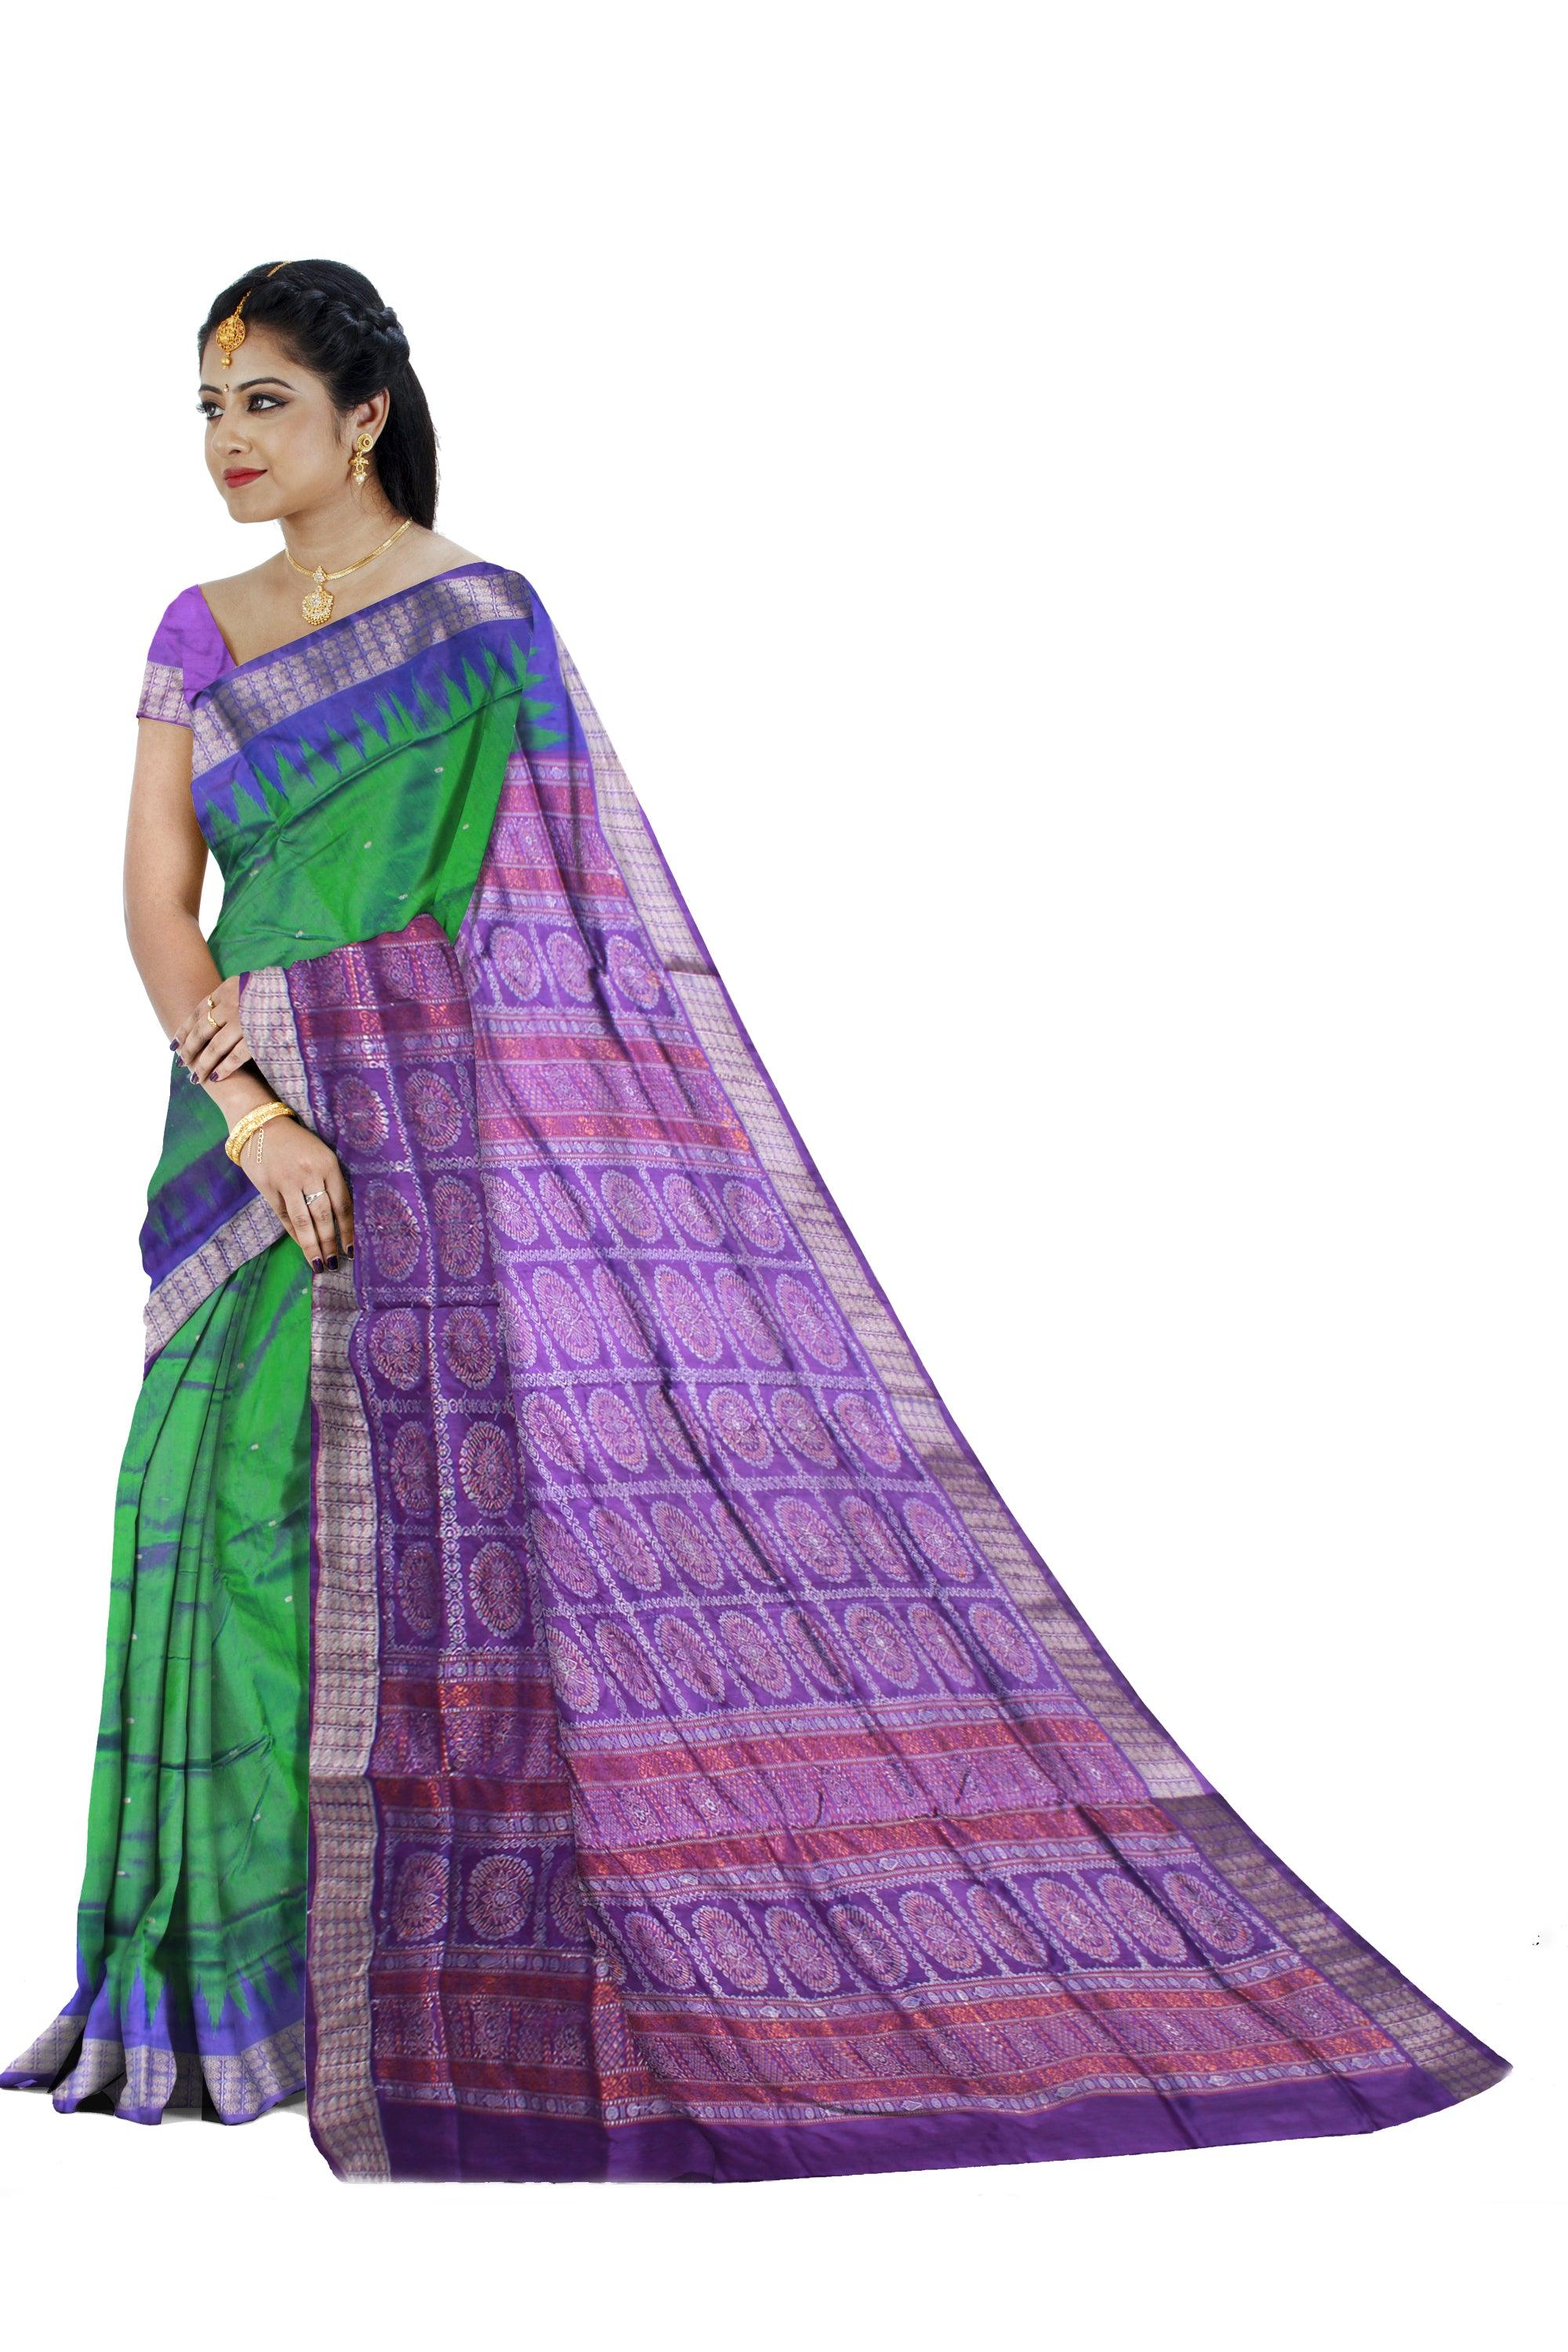 ROYAL GREEN AND PURPLE COLOR BOOTY PATTERN PATA SAREE , ATTACHED WITH BLOUSE PIECE. - Koshali Arts & Crafts Enterprise